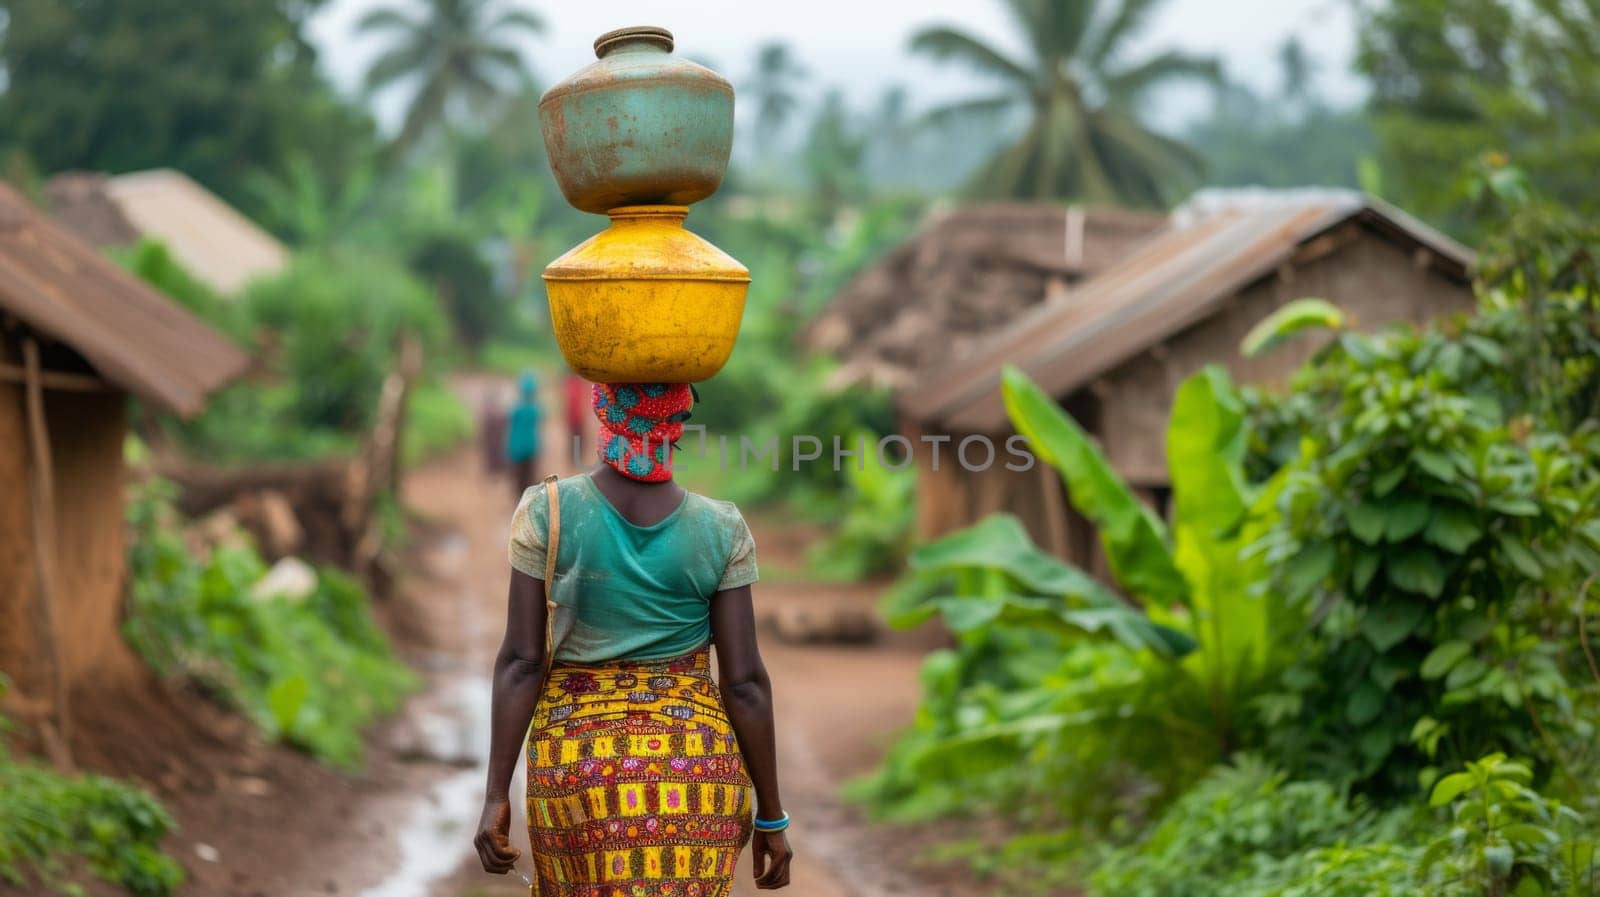 A woman walking down a dirt road with water jugs on her head